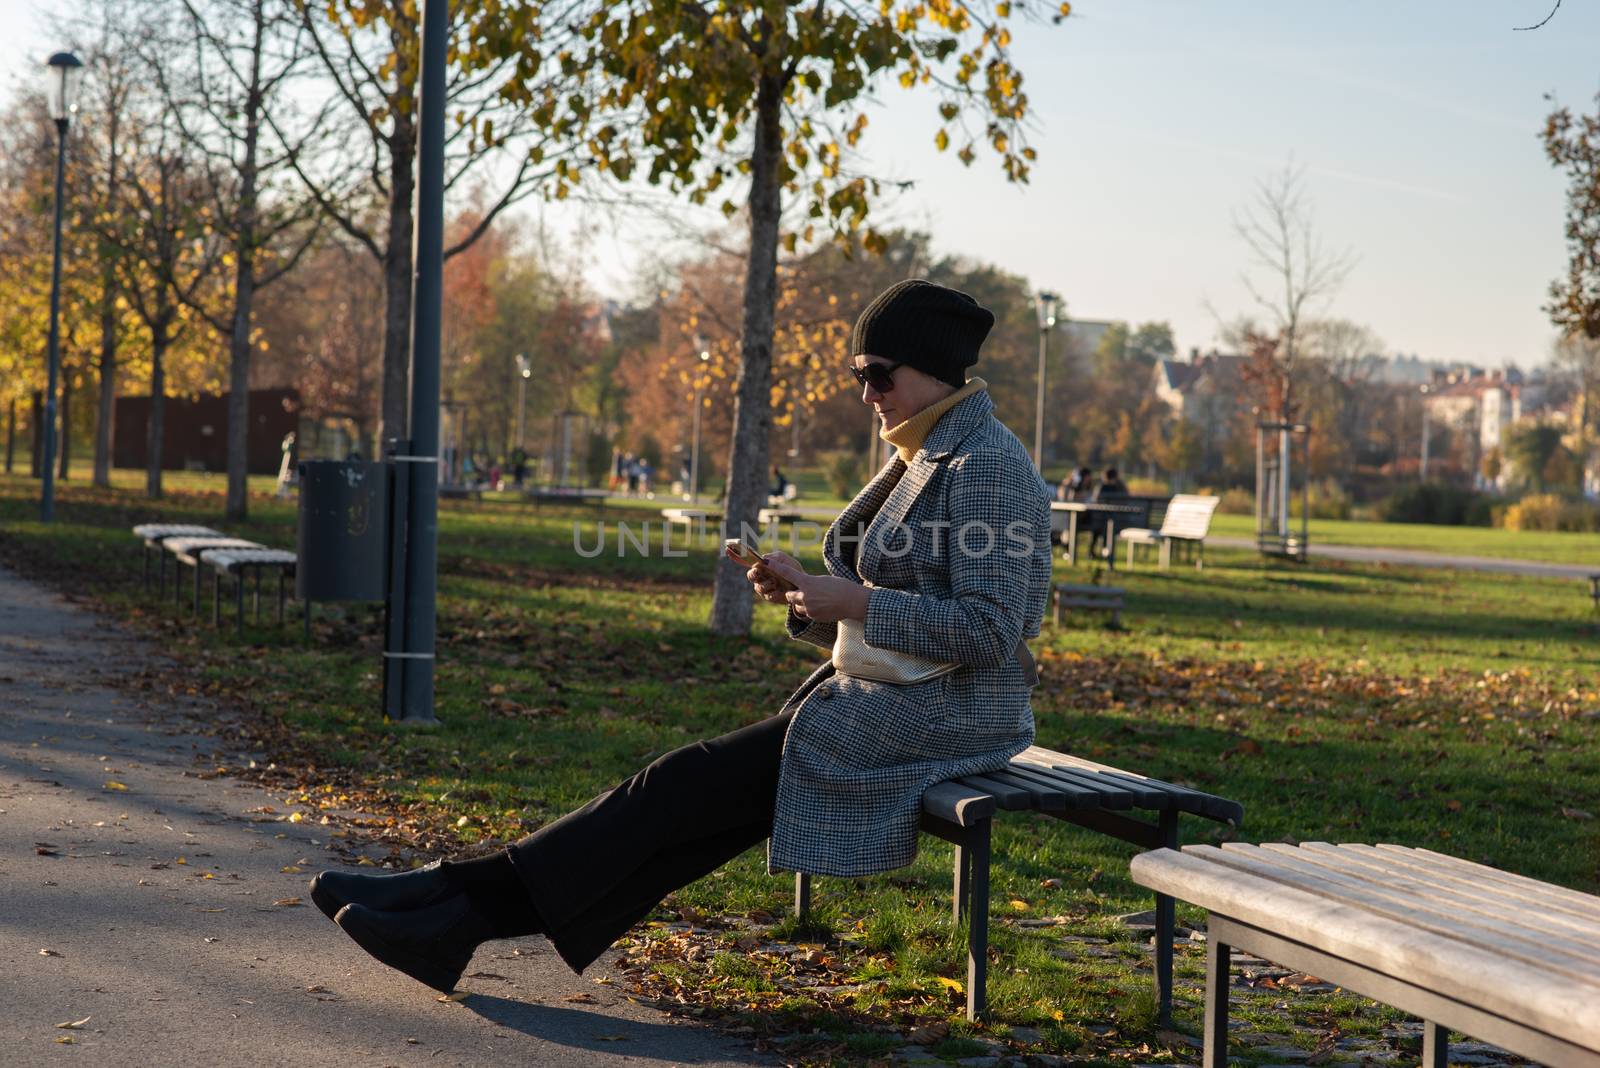 1/14/2020. Park Stromovka. Prague czech Republic. A woman is checking his phone in the park on a Sunday winter day.